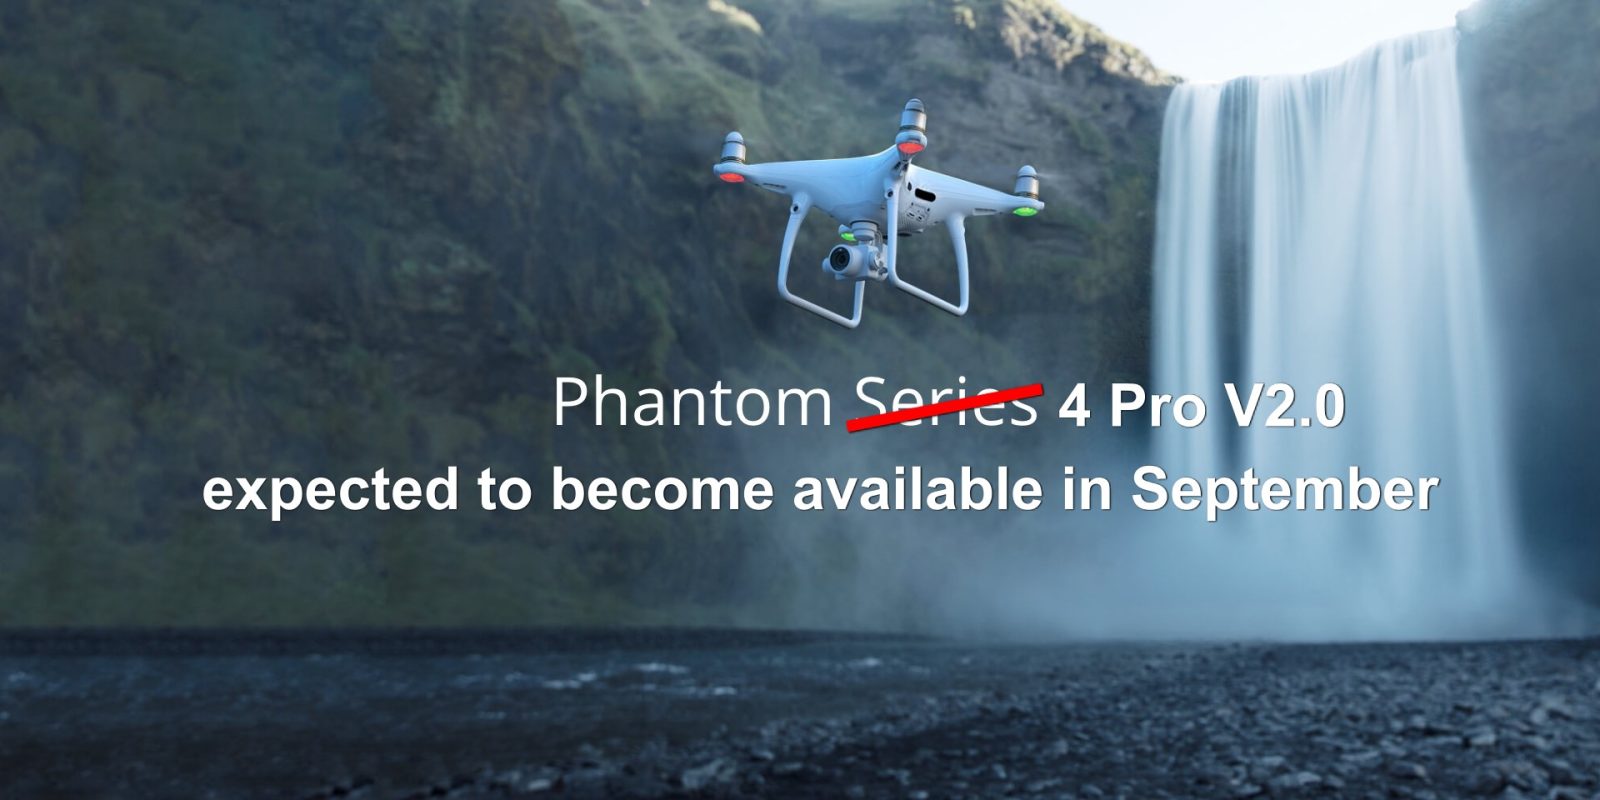 DJI Phantom 4 Pro V2.0 is still expected to become available in September